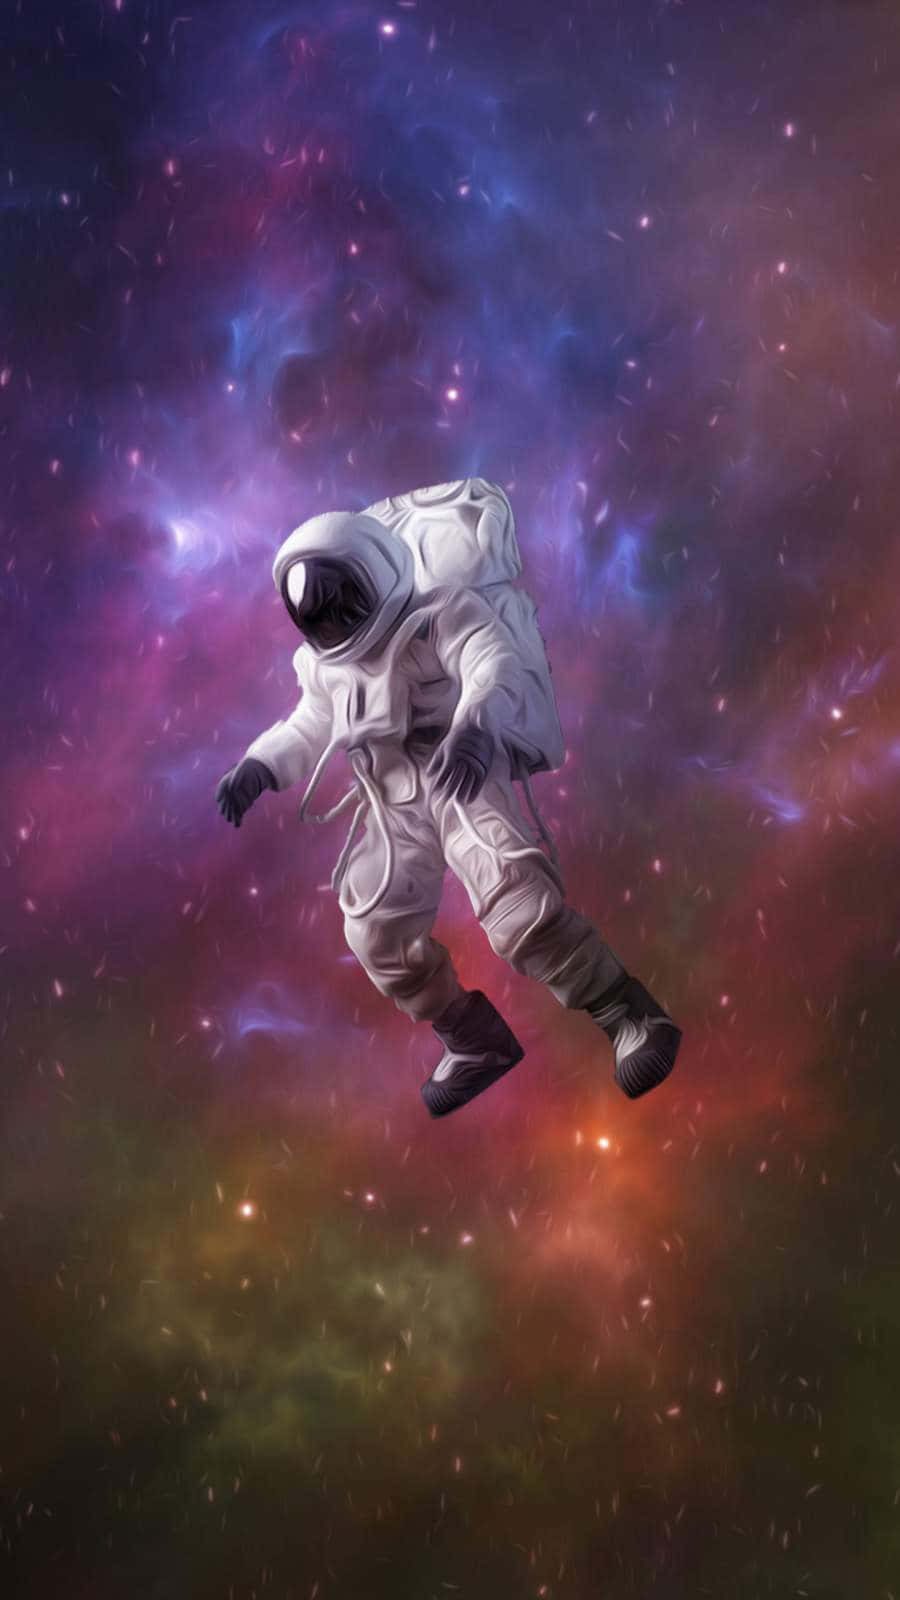 Get Ready For Liftoff In Space With Astronaut iPhone Wallpaper